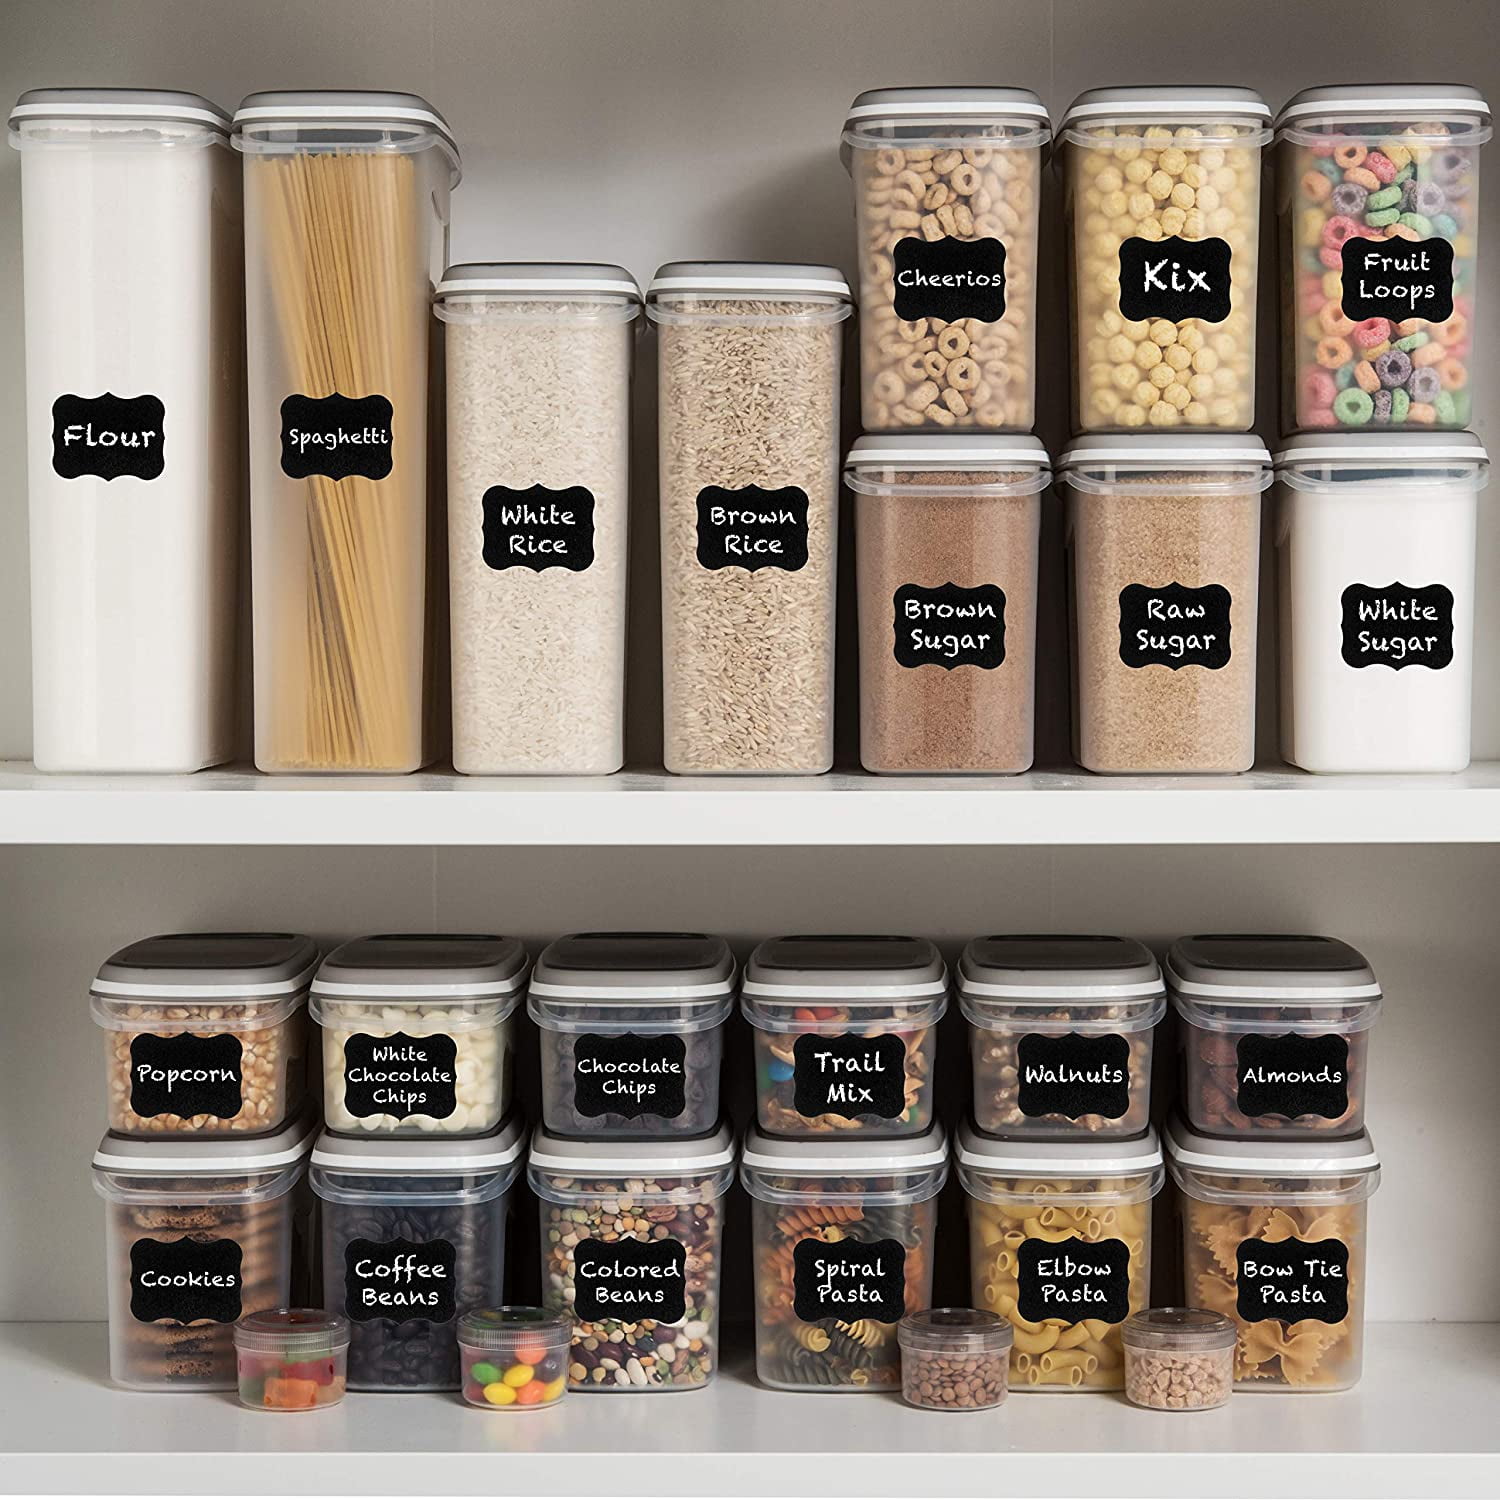 LOCK & LOCK Easy Essentials Food lids/Pantry Storage/Airtight containers,  BPA Free, Square-16.9 Cup-for Chips, Clear